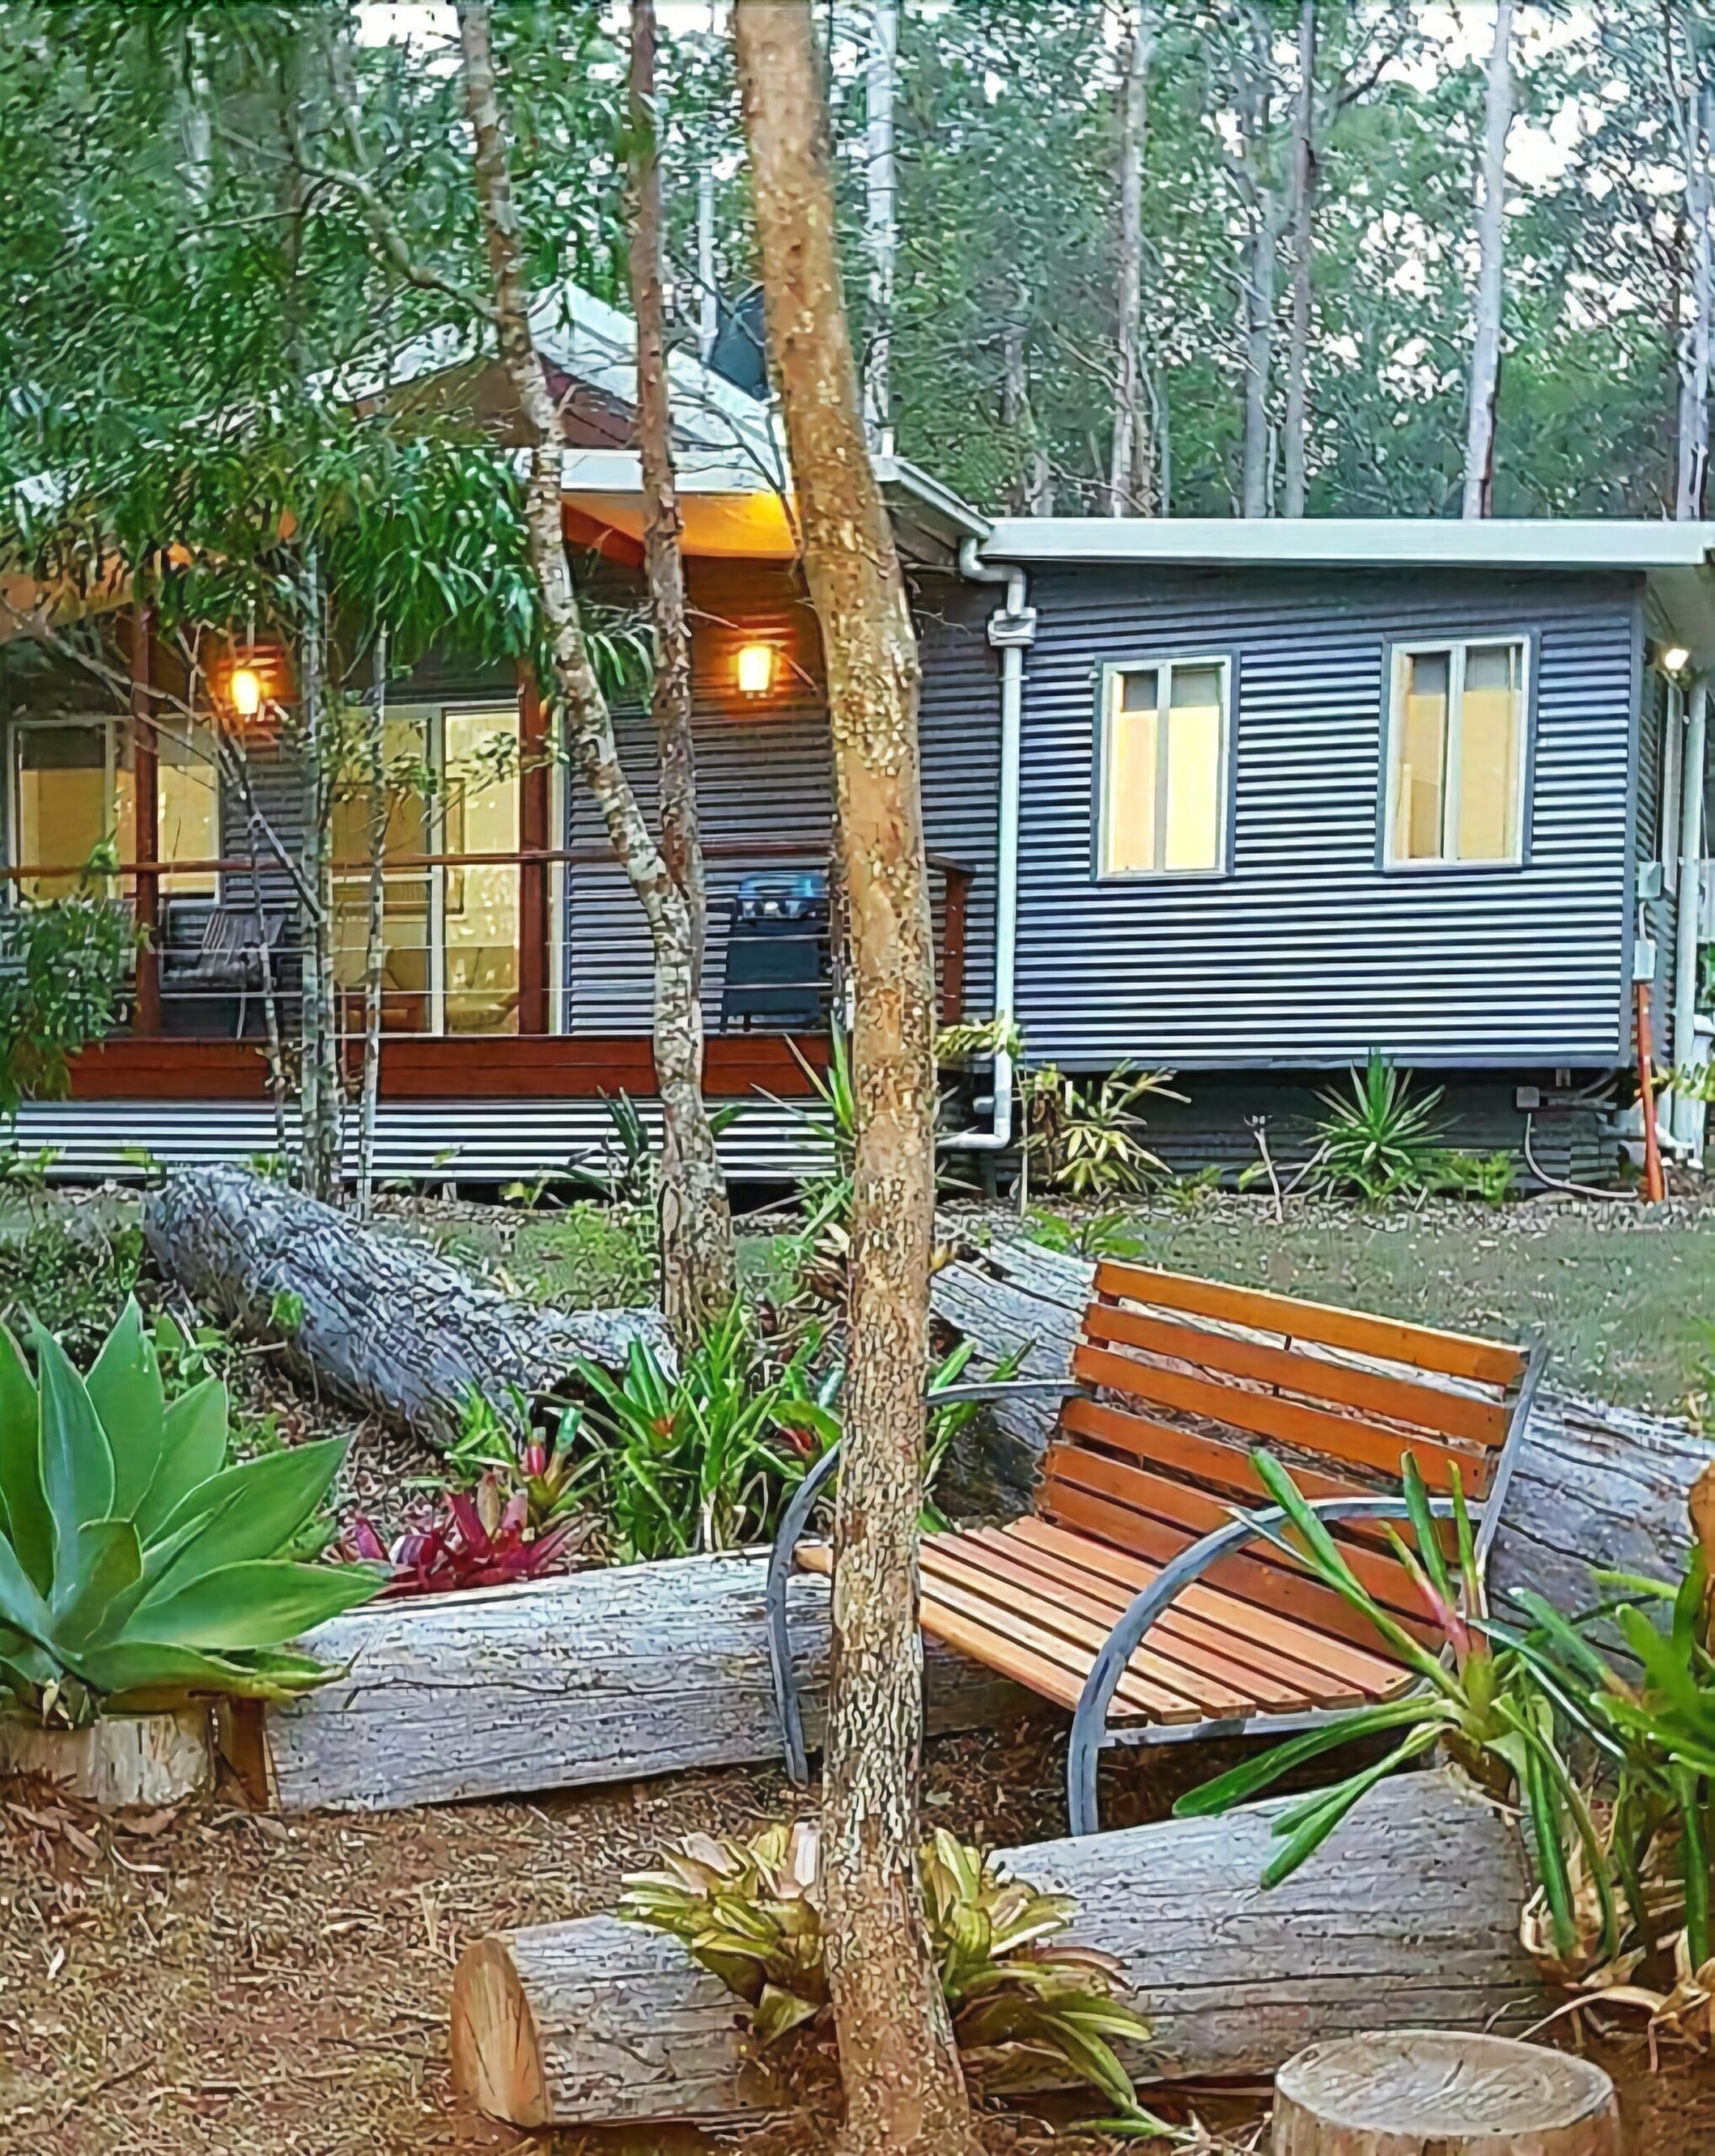 Oakey Creek Private Retreat – Secluded Romantic Getaway Just For Couples